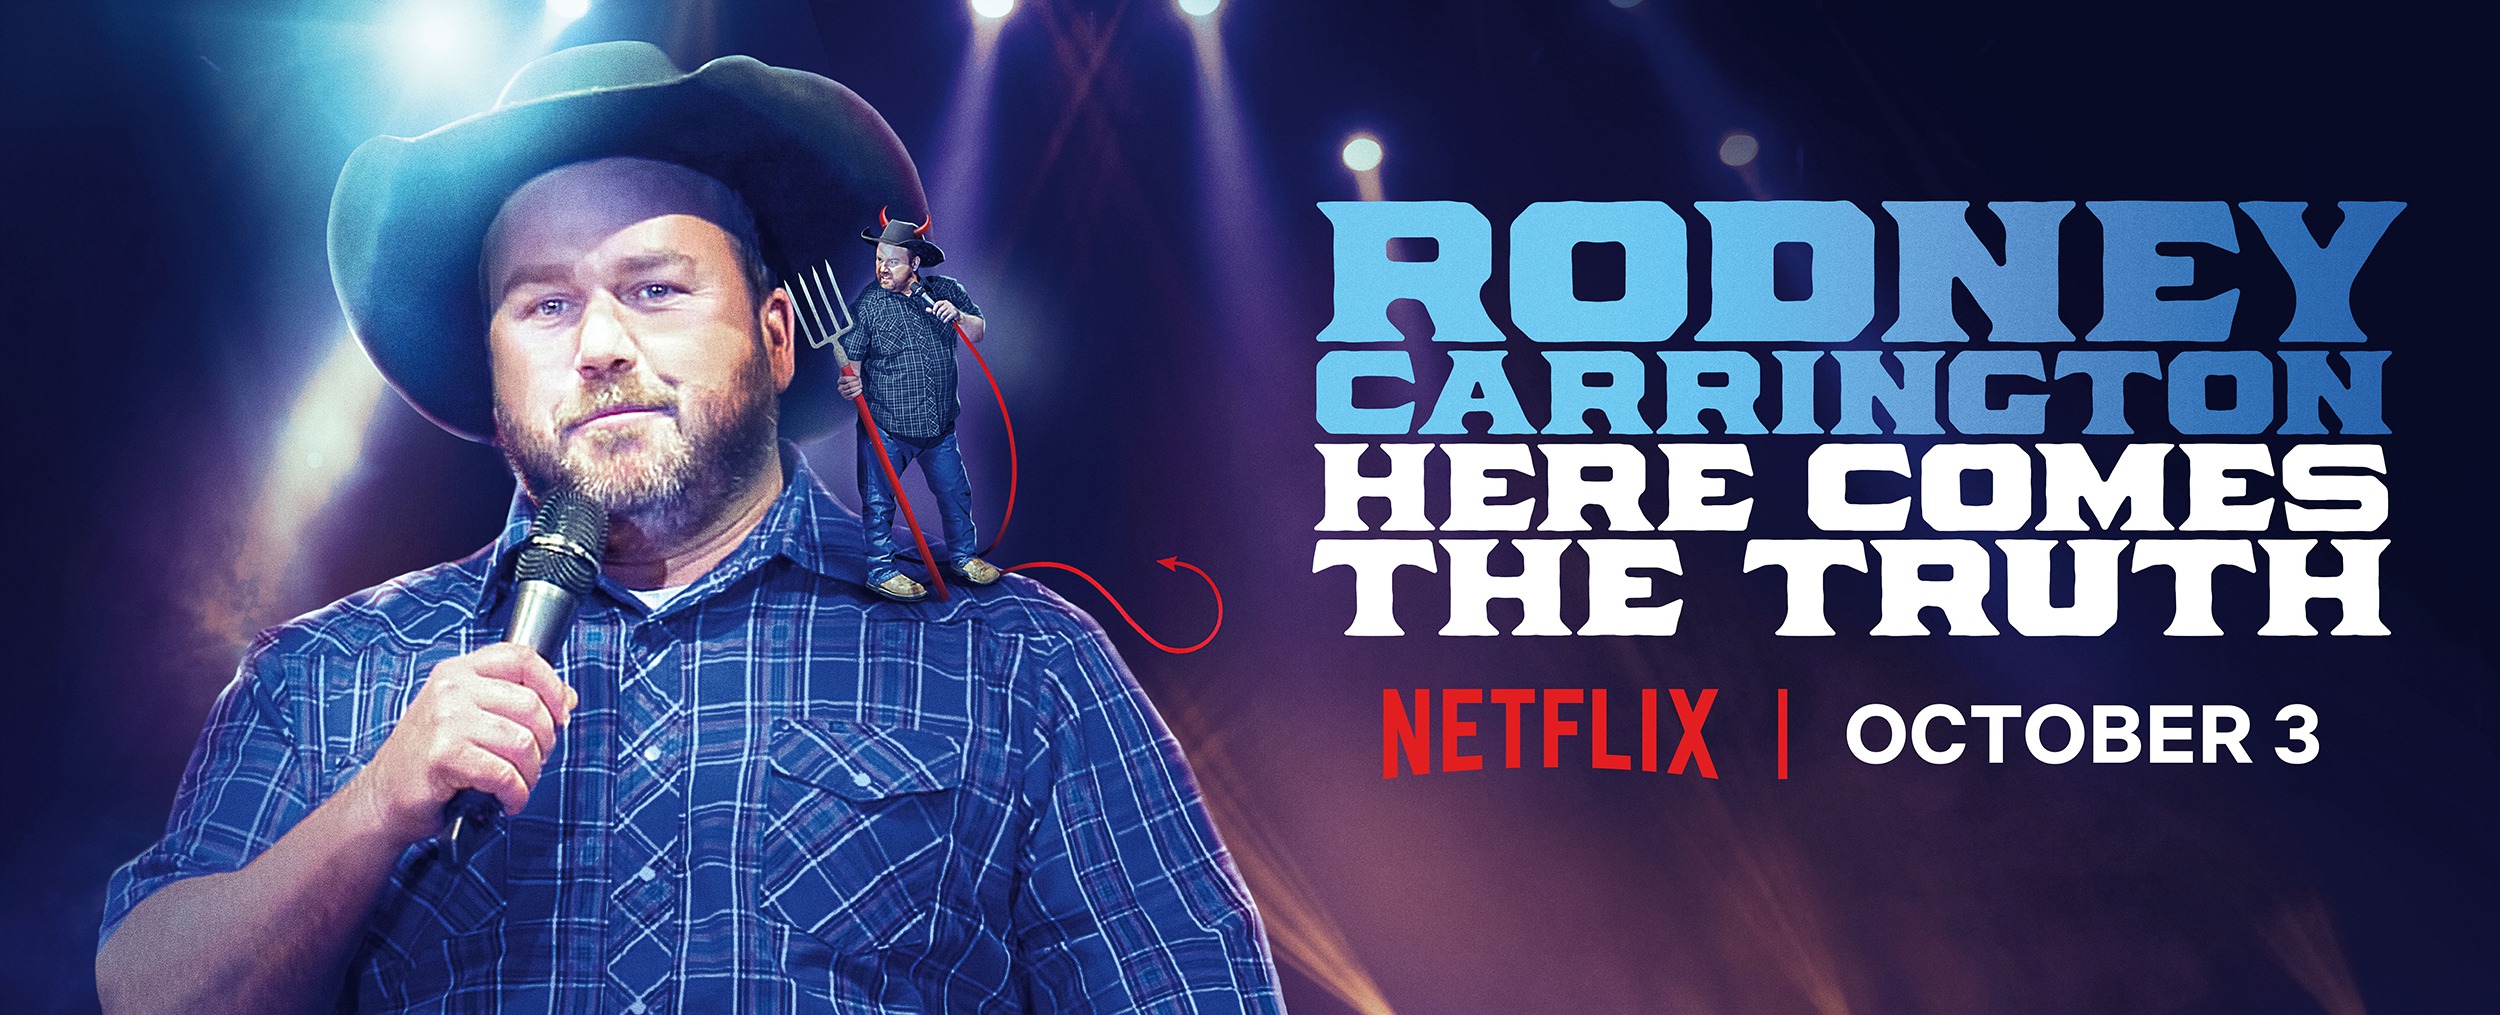 Mega Sized TV Poster Image for Rodney Carrington: Here Comes The Truth 